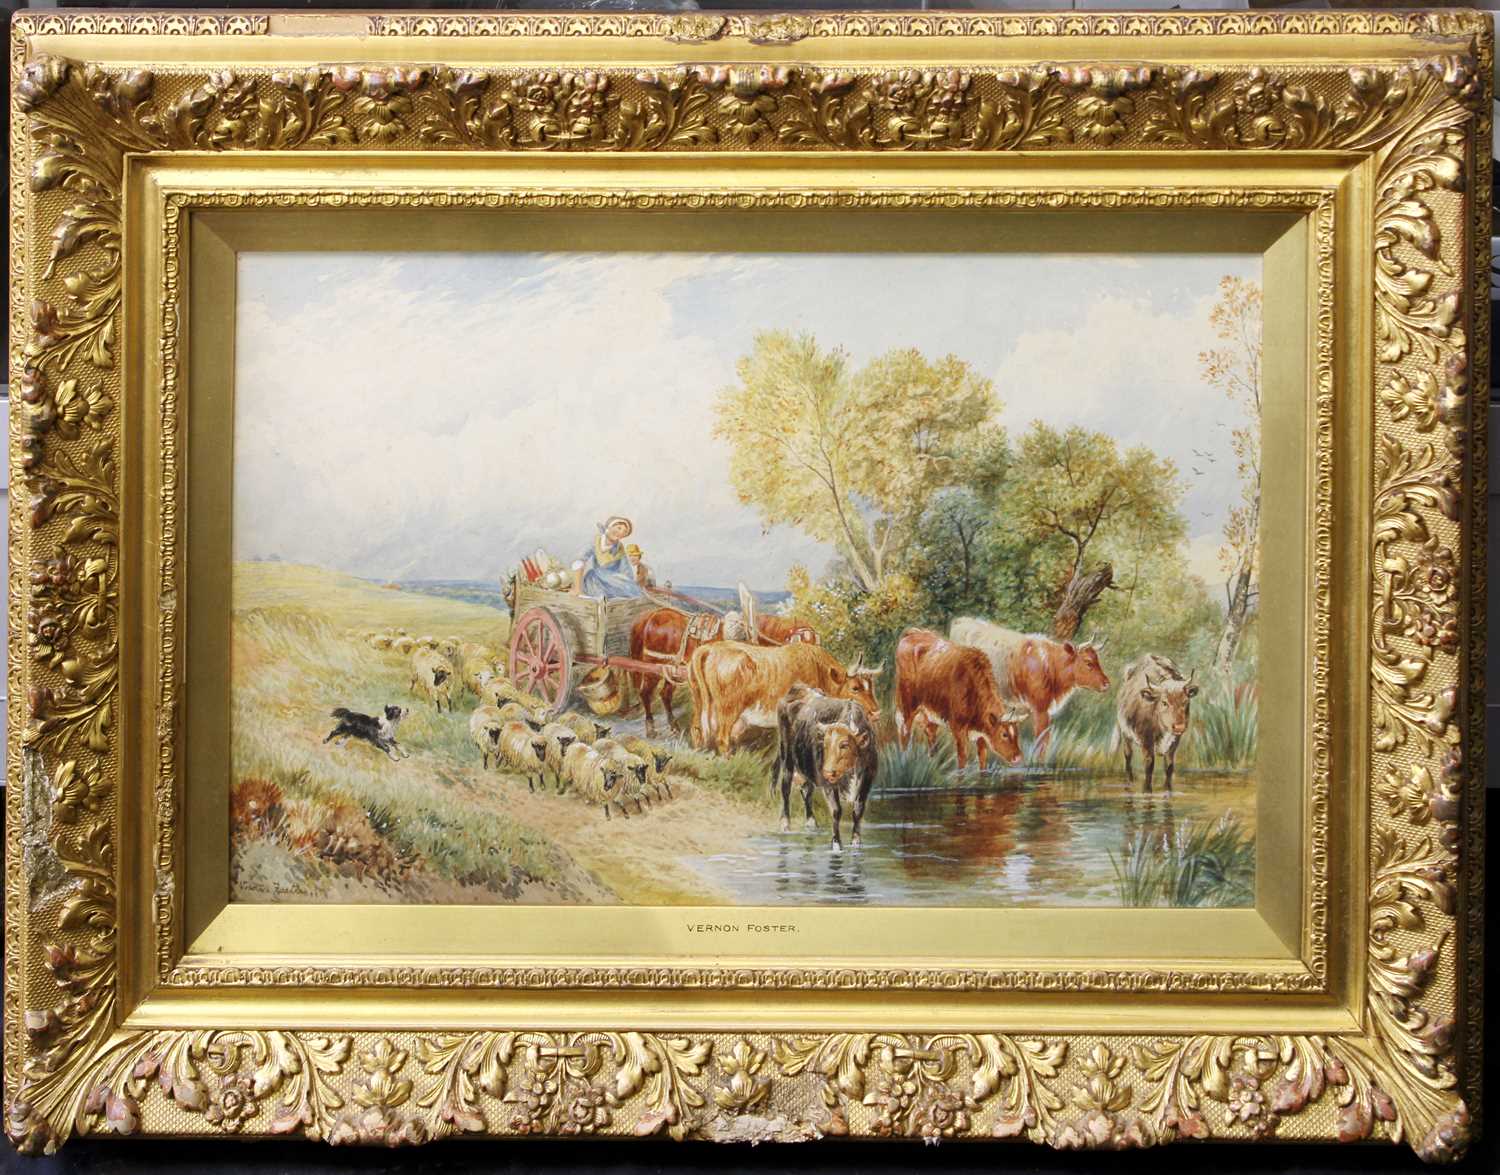 Vernon Foster (fl.1880-1920) Landscape cart with cows and sheep by stream Signed, watercolour, - Image 2 of 4